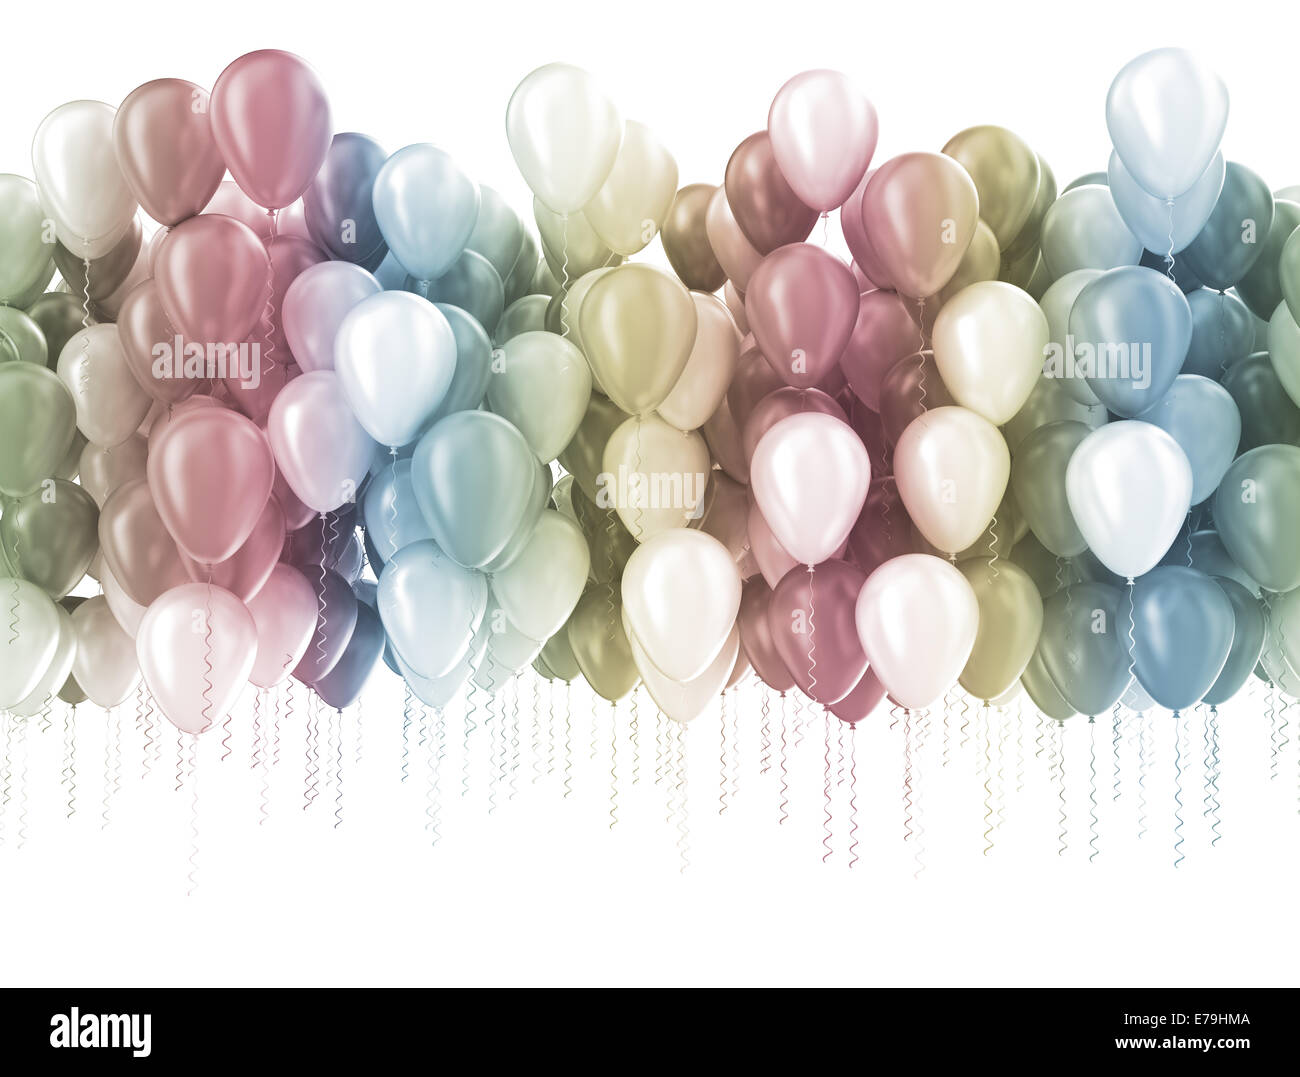 Multi color pastel color party balloons isolated on white Stock Photo